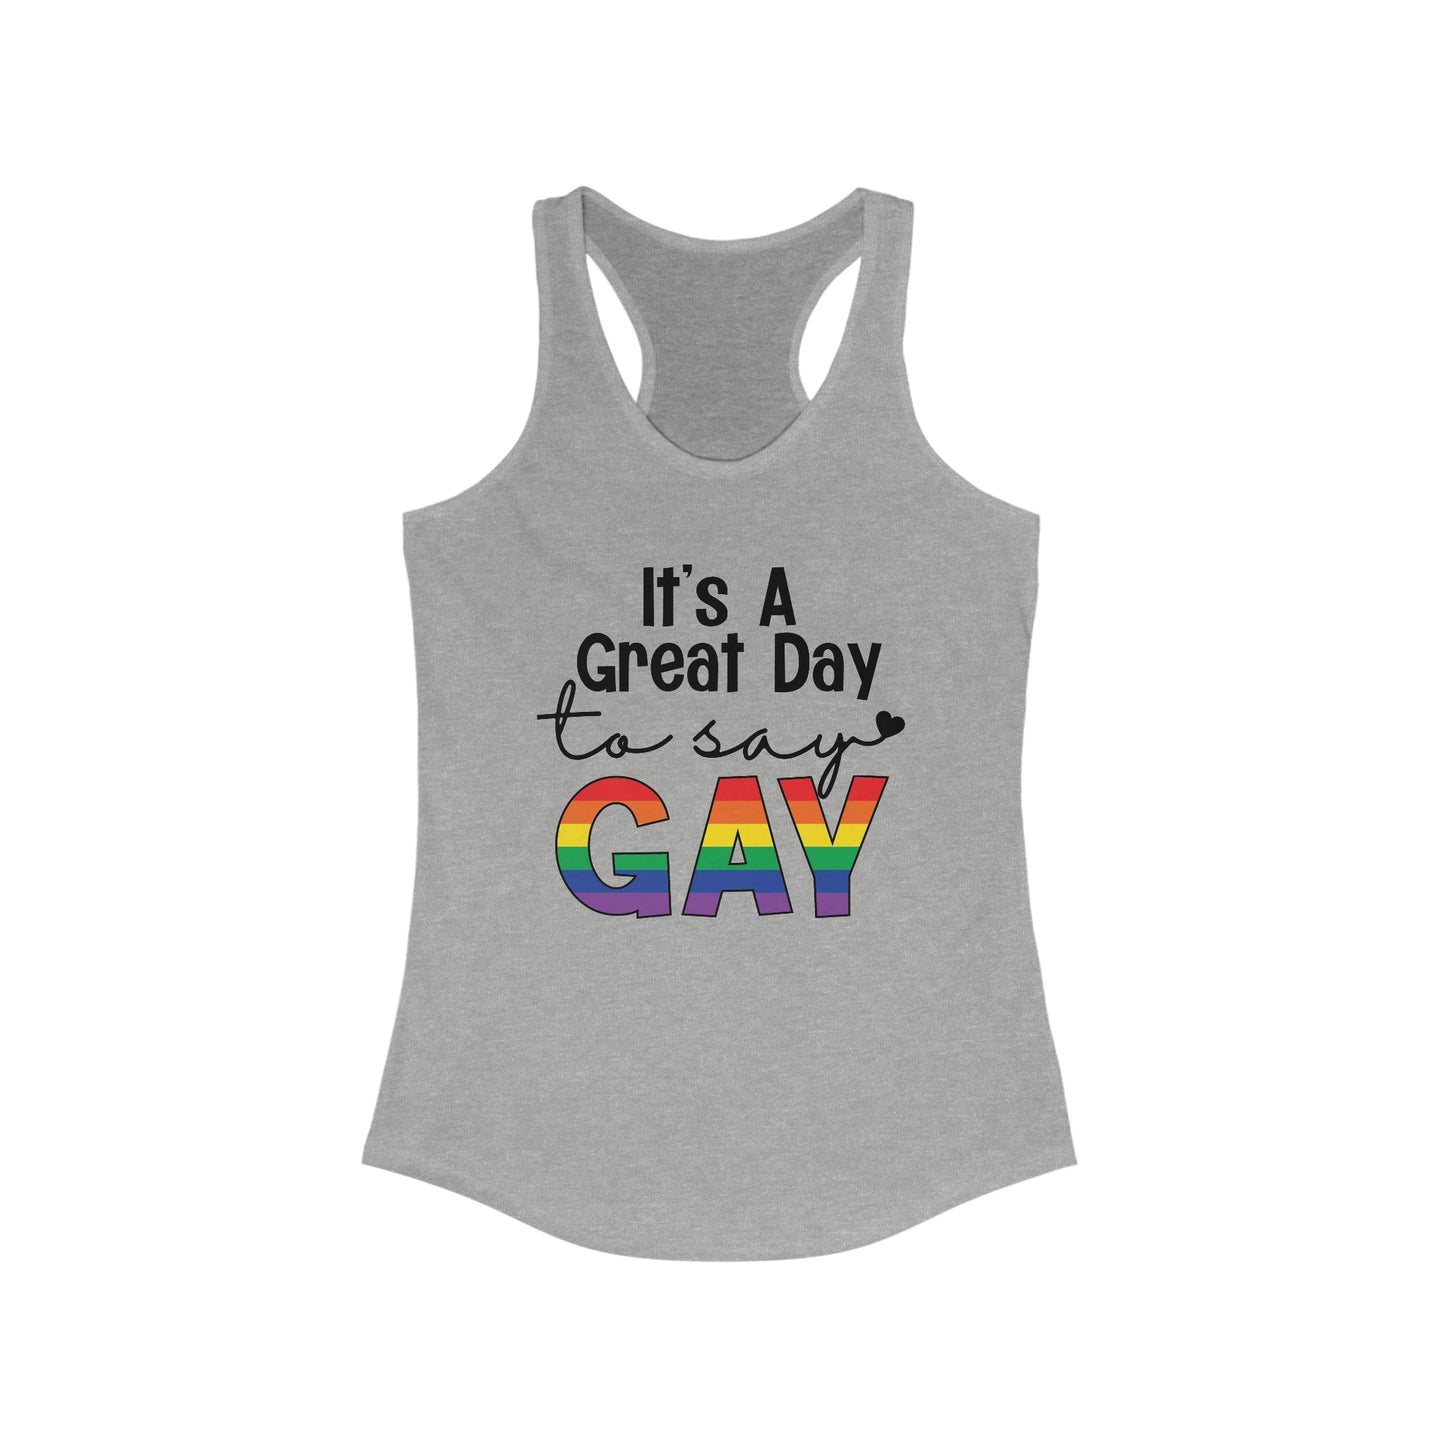 Pride: It's a Great Day to Say Gay (rainbow) - Women's Racerback Tank